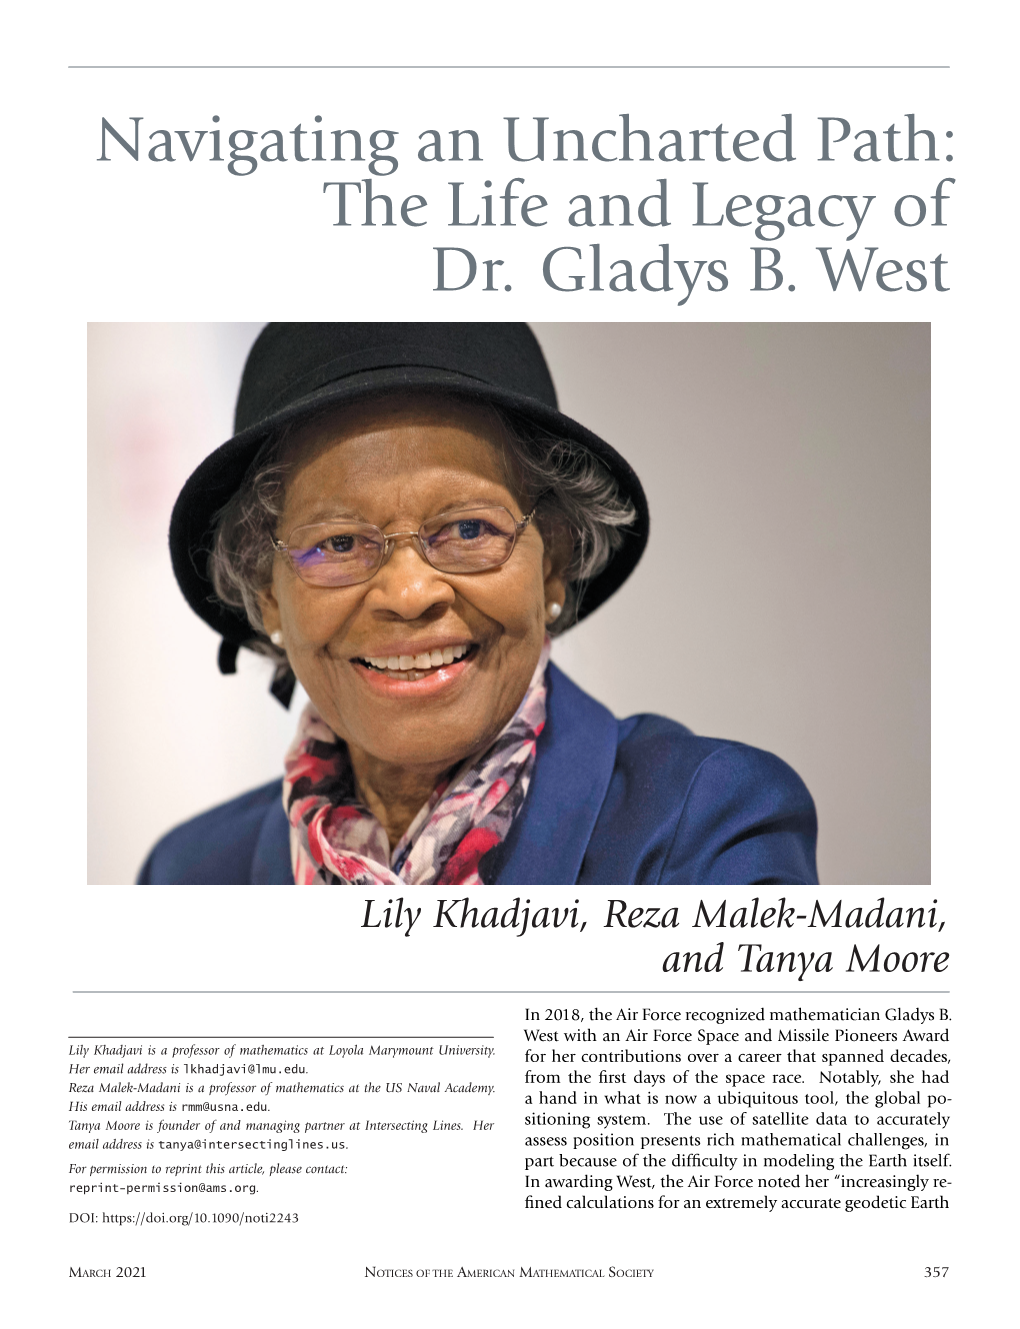 Navigating an Uncharted Path: the Life and Legacy of Dr. Gladys B. West